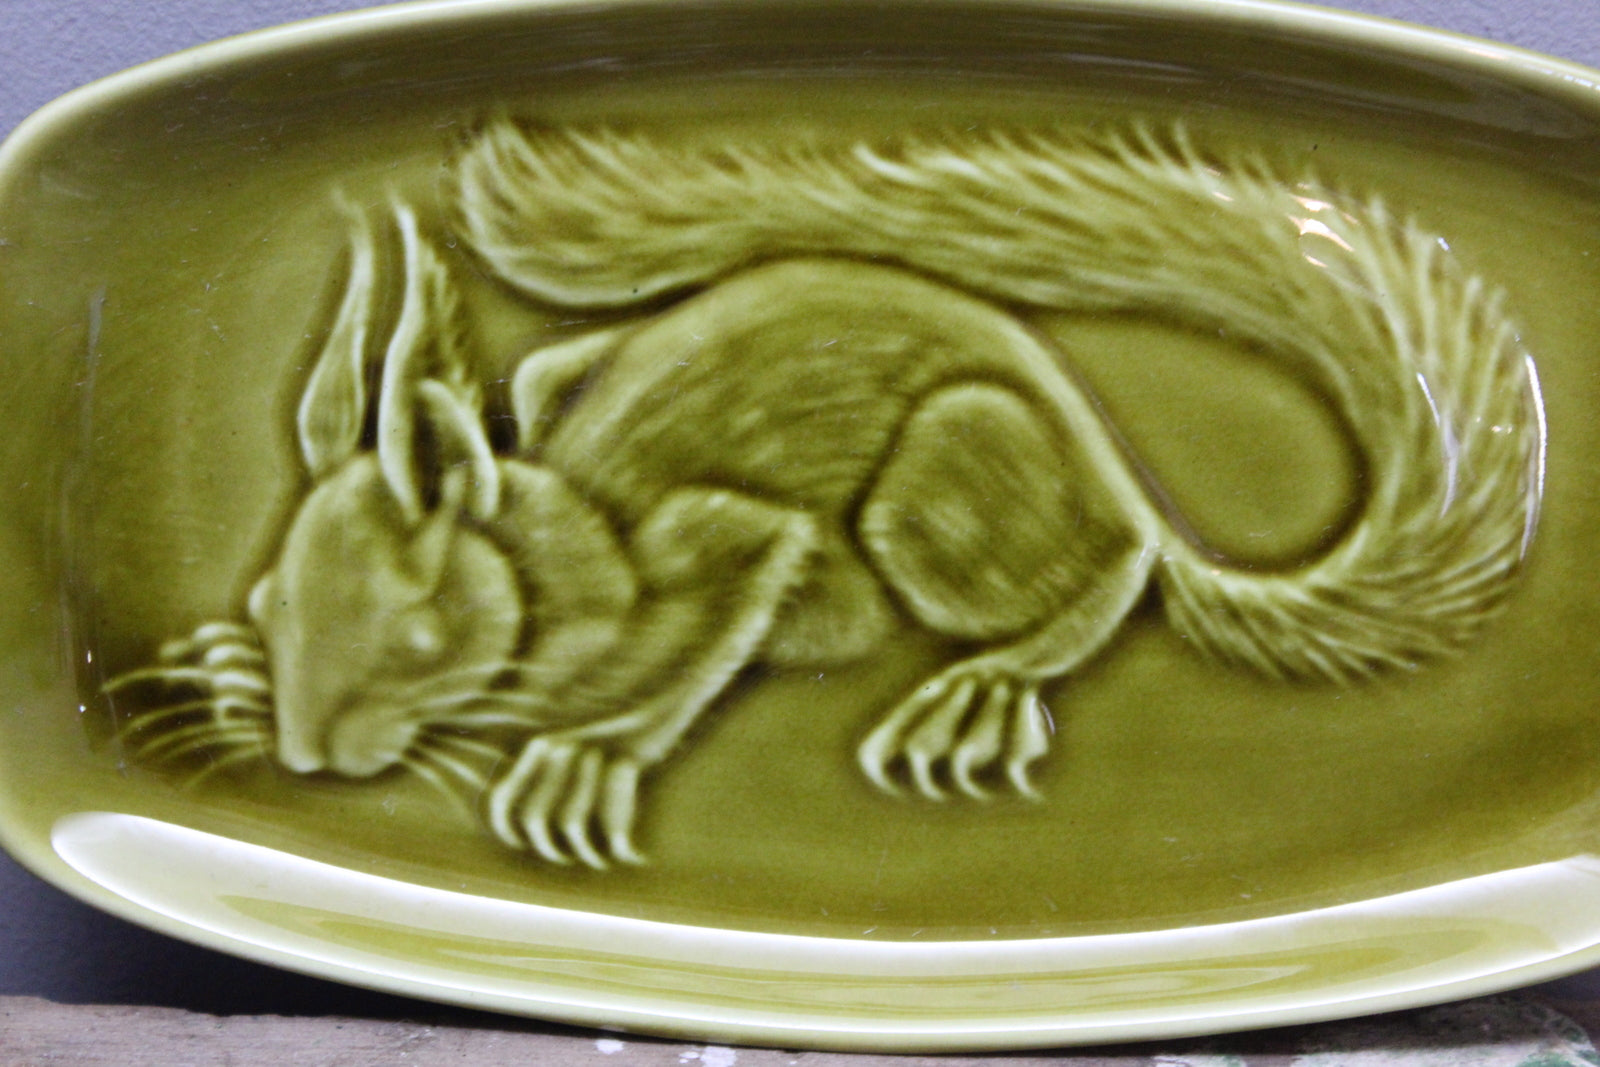 Poole Pottery Squirrel Dish - Kernow Furniture